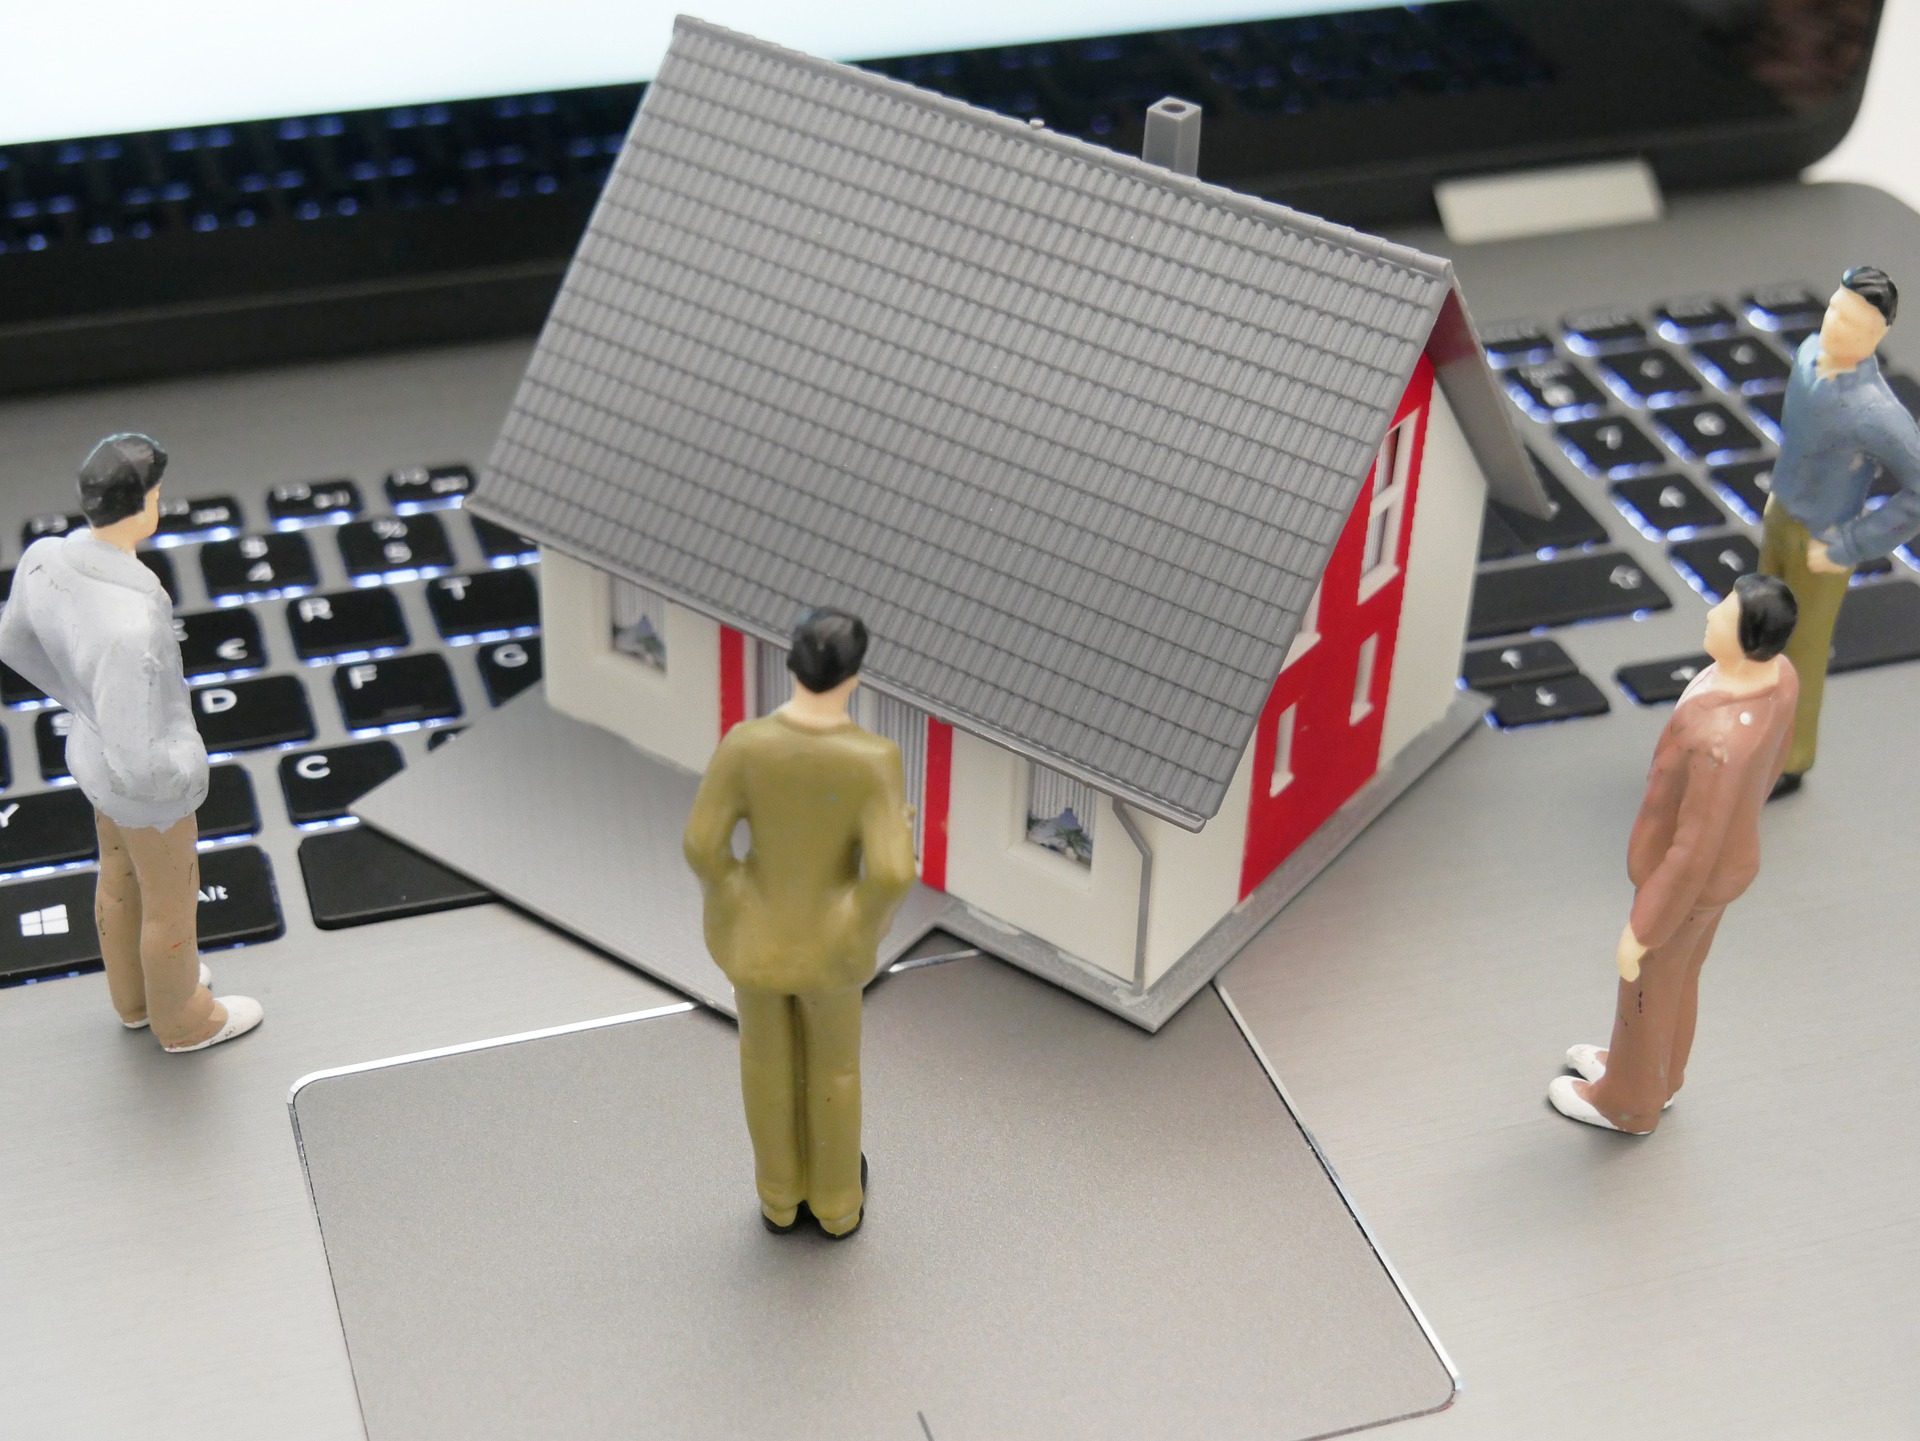 A model house and people figurines on top of a laptop keyboard